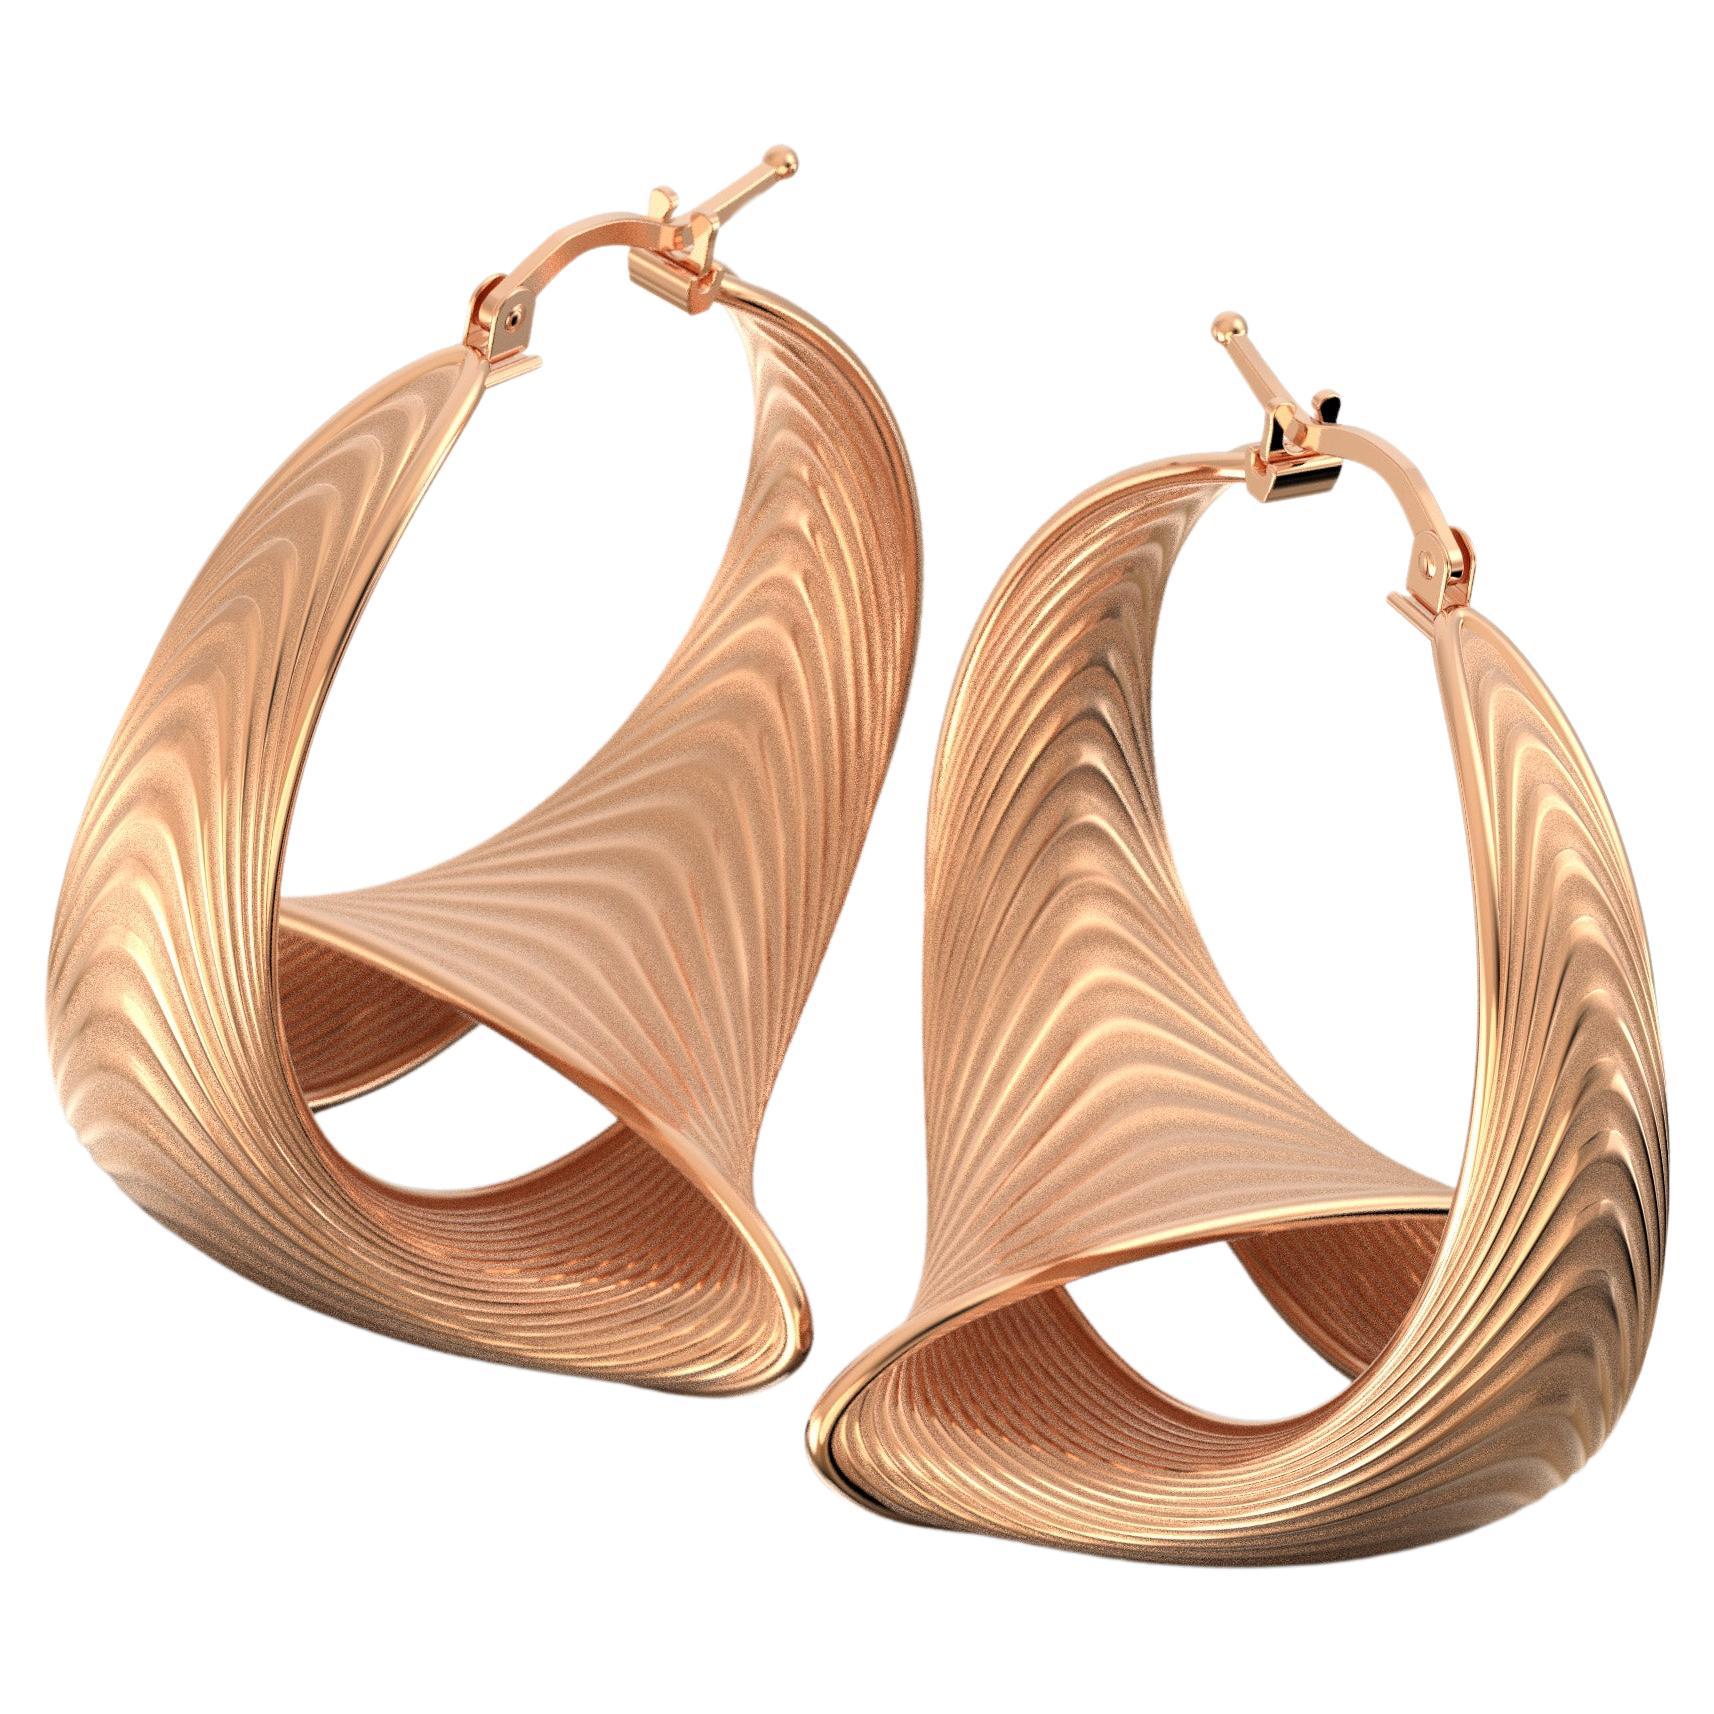 Discover timeless elegance with our Made to order 33mm diameter Large Hoop Earrings. Handcrafted in Italy by Oltremare Gioielli, these Modern Gold Hoop Earrings exude sophistication in 14k gold. Elevate your style with these Contemporary Gold